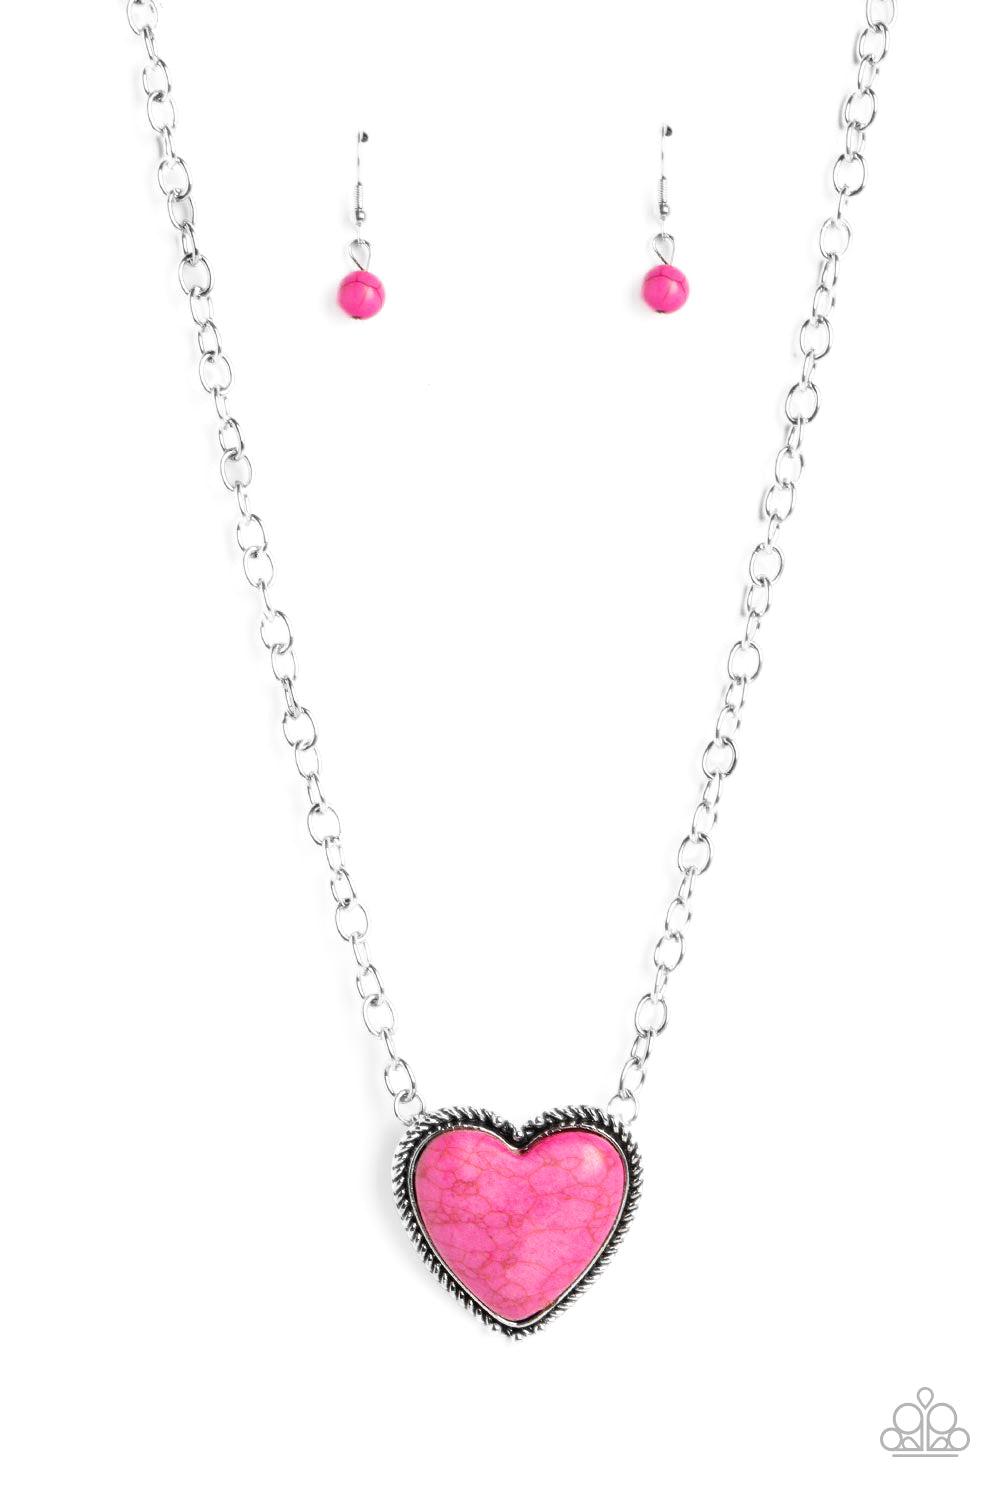 Authentic Admirer Pink Stone Heart Necklace - Paparazzi Accessories- lightbox - CarasShop.com - $5 Jewelry by Cara Jewels